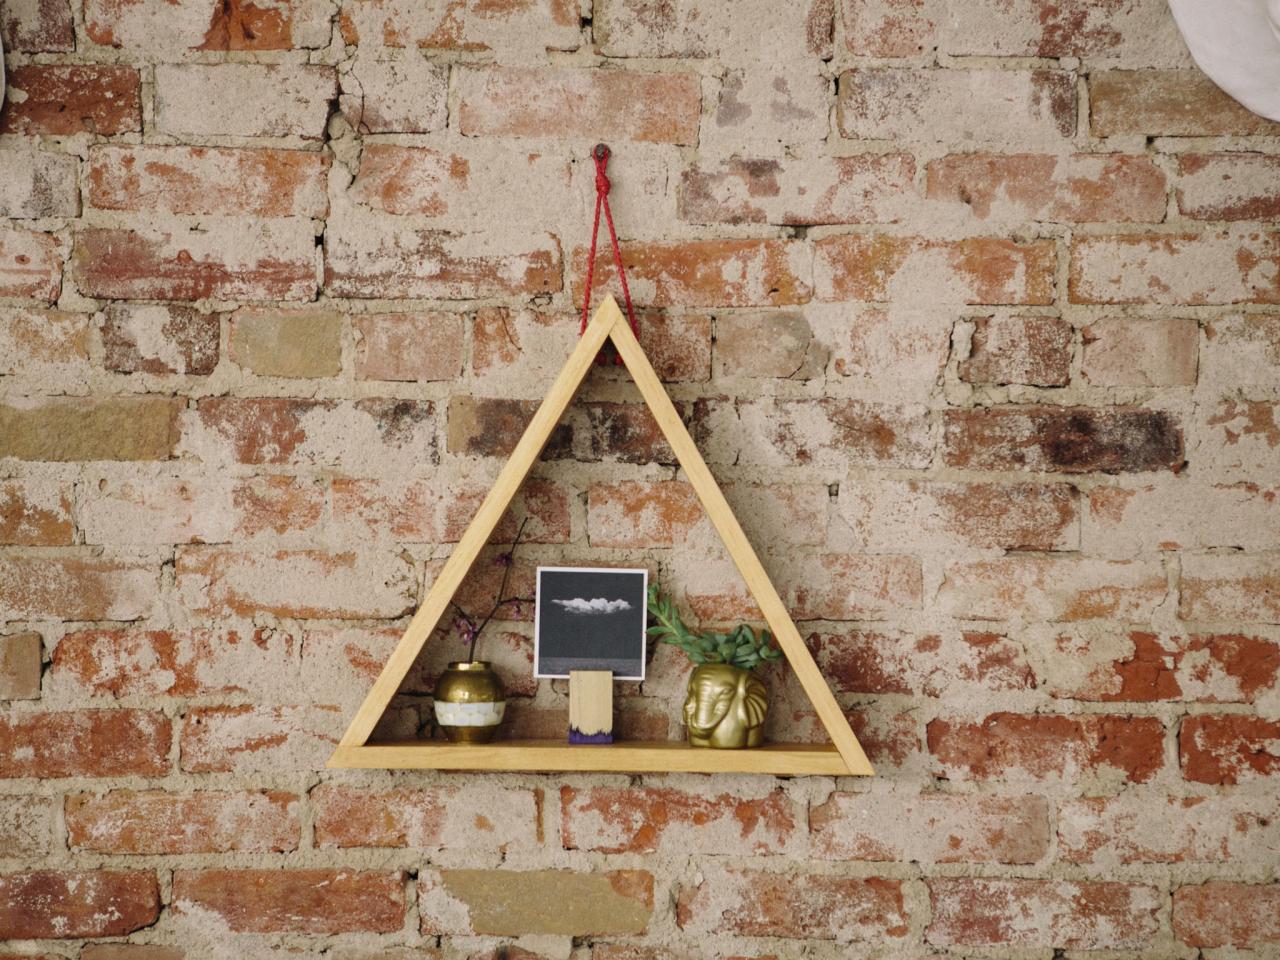 How To Make A Hanging Triangle Shelf, How To Hang Floating Shelves On Brick